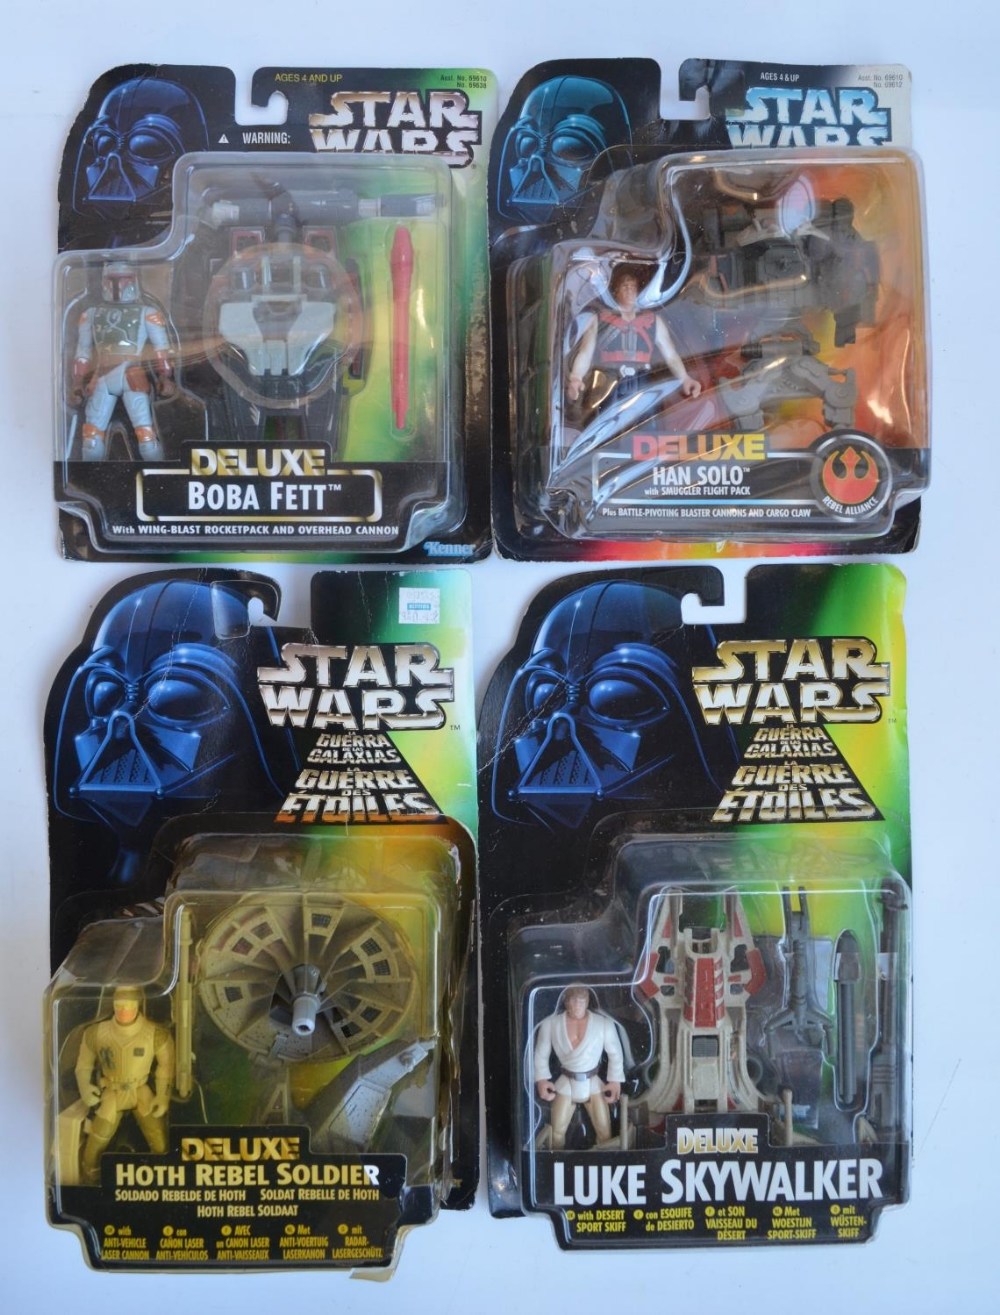 Collection of Star Wars action figures and play sets from Kenner to include 2 figure Shadows Of - Image 8 of 11